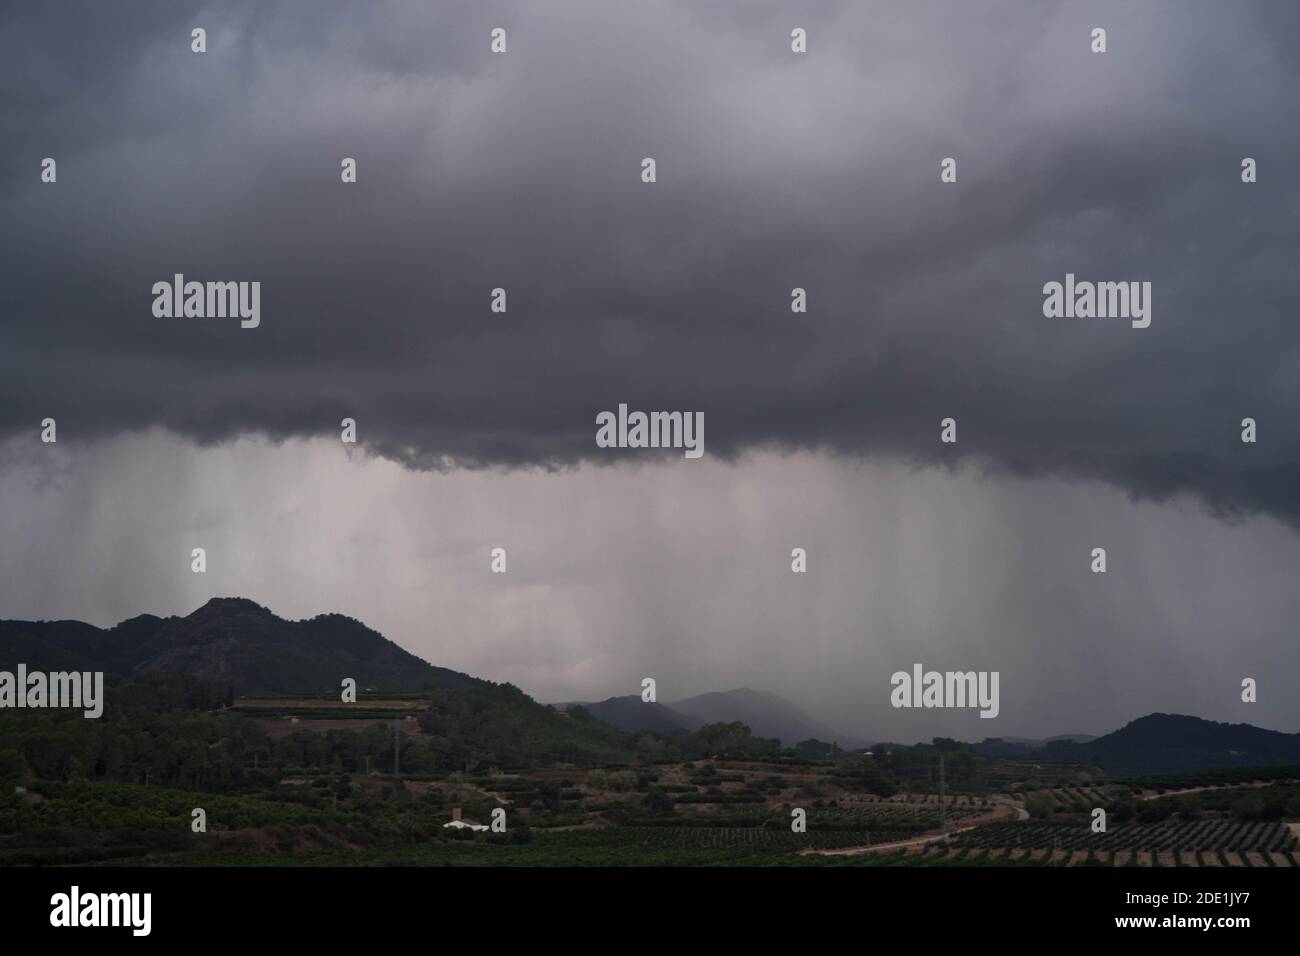 Heavy rainstorm rolling over Spanish countryside hills and valley Stock Photo